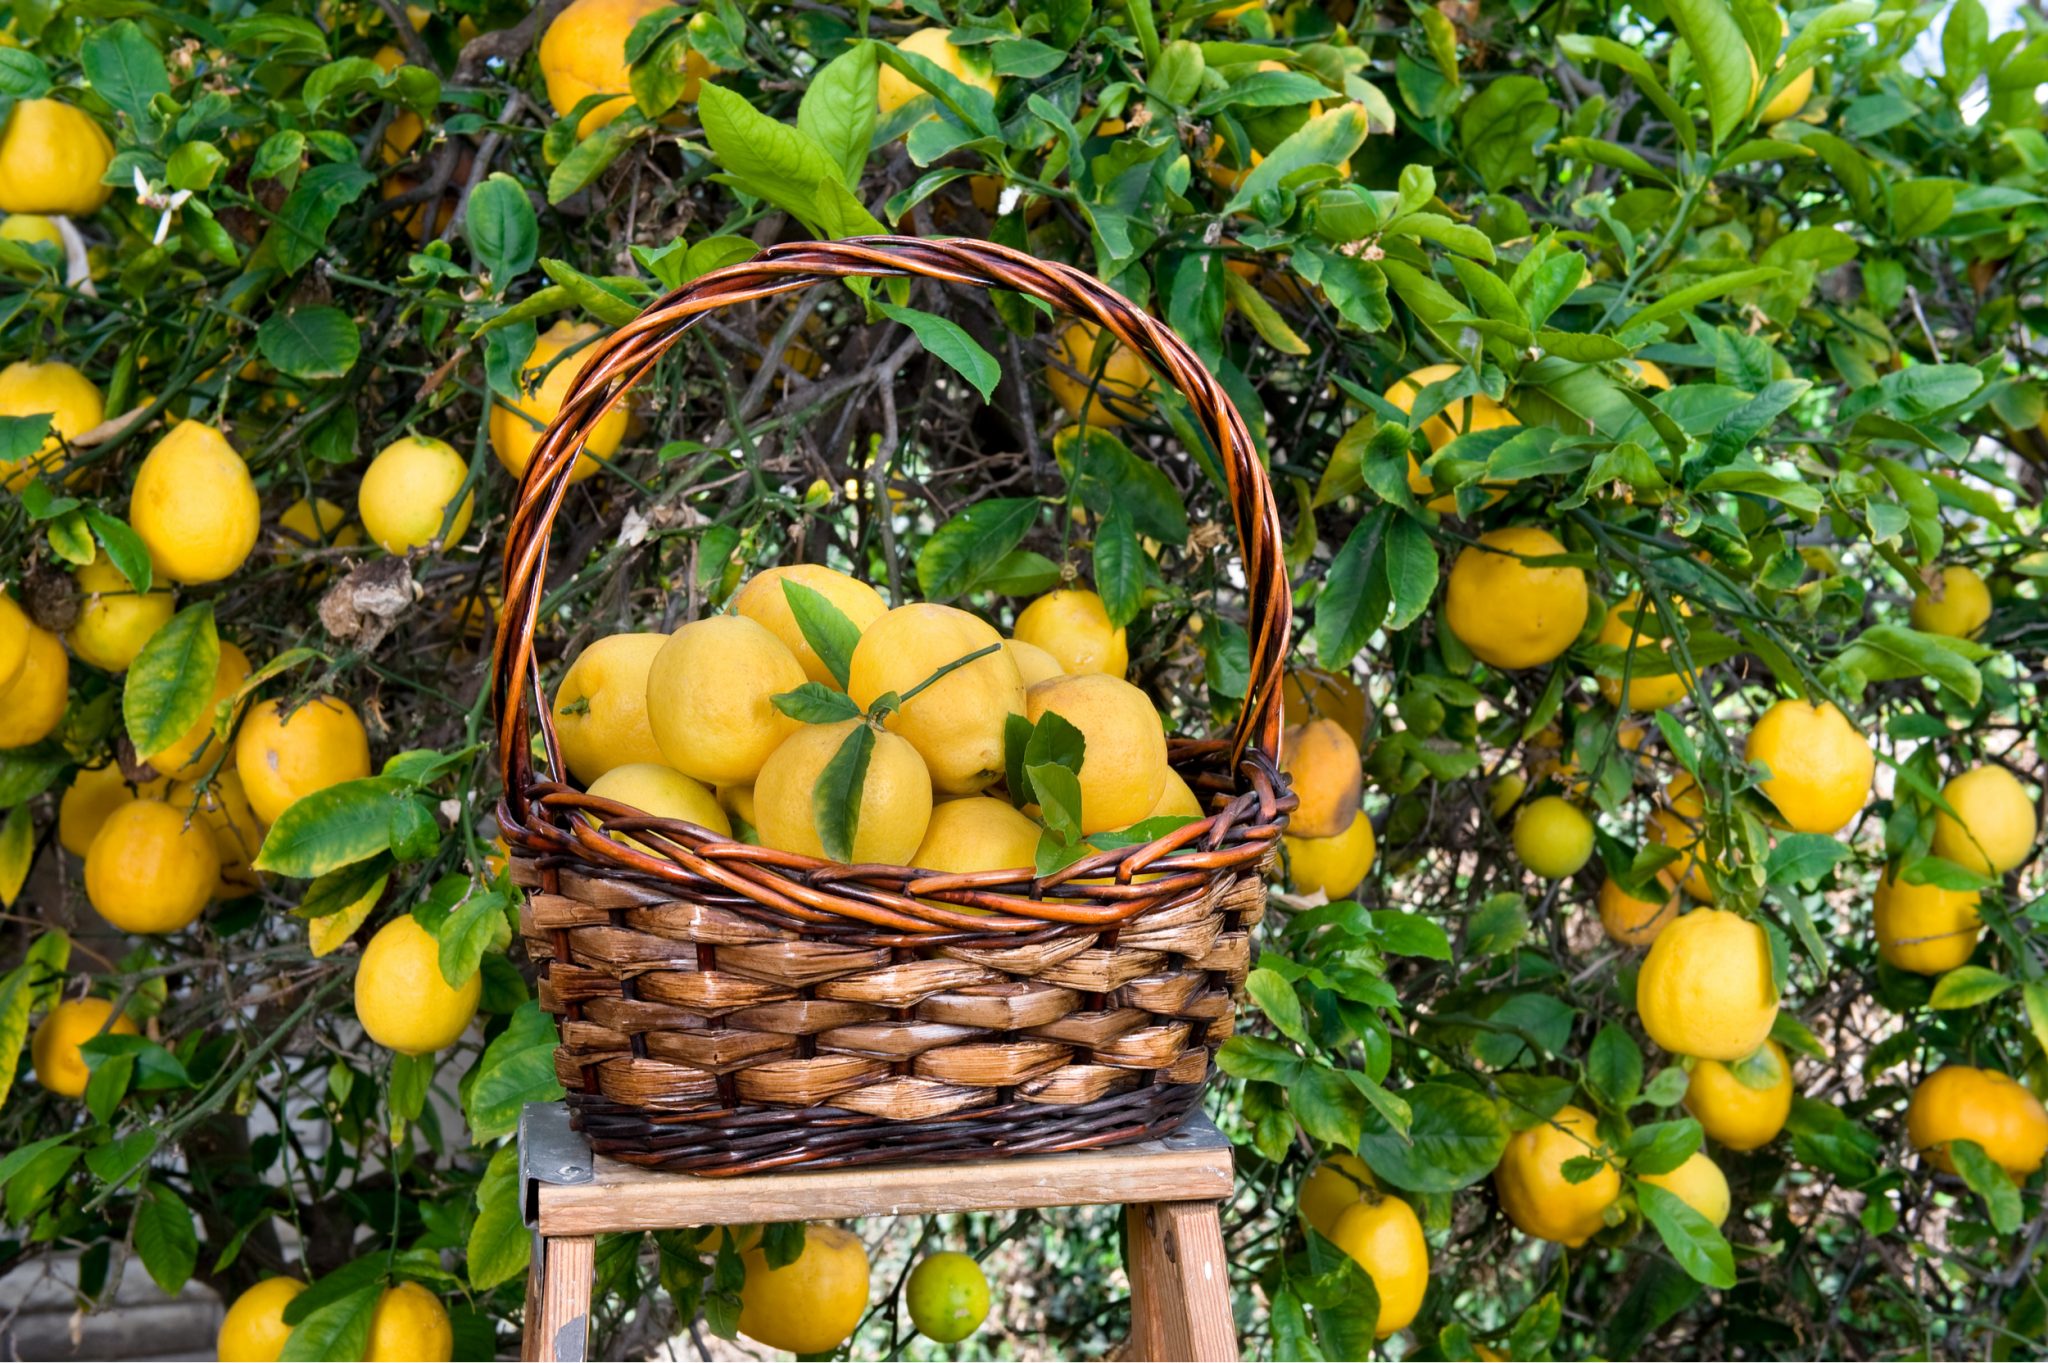 How to Harvest Citrus Fruits